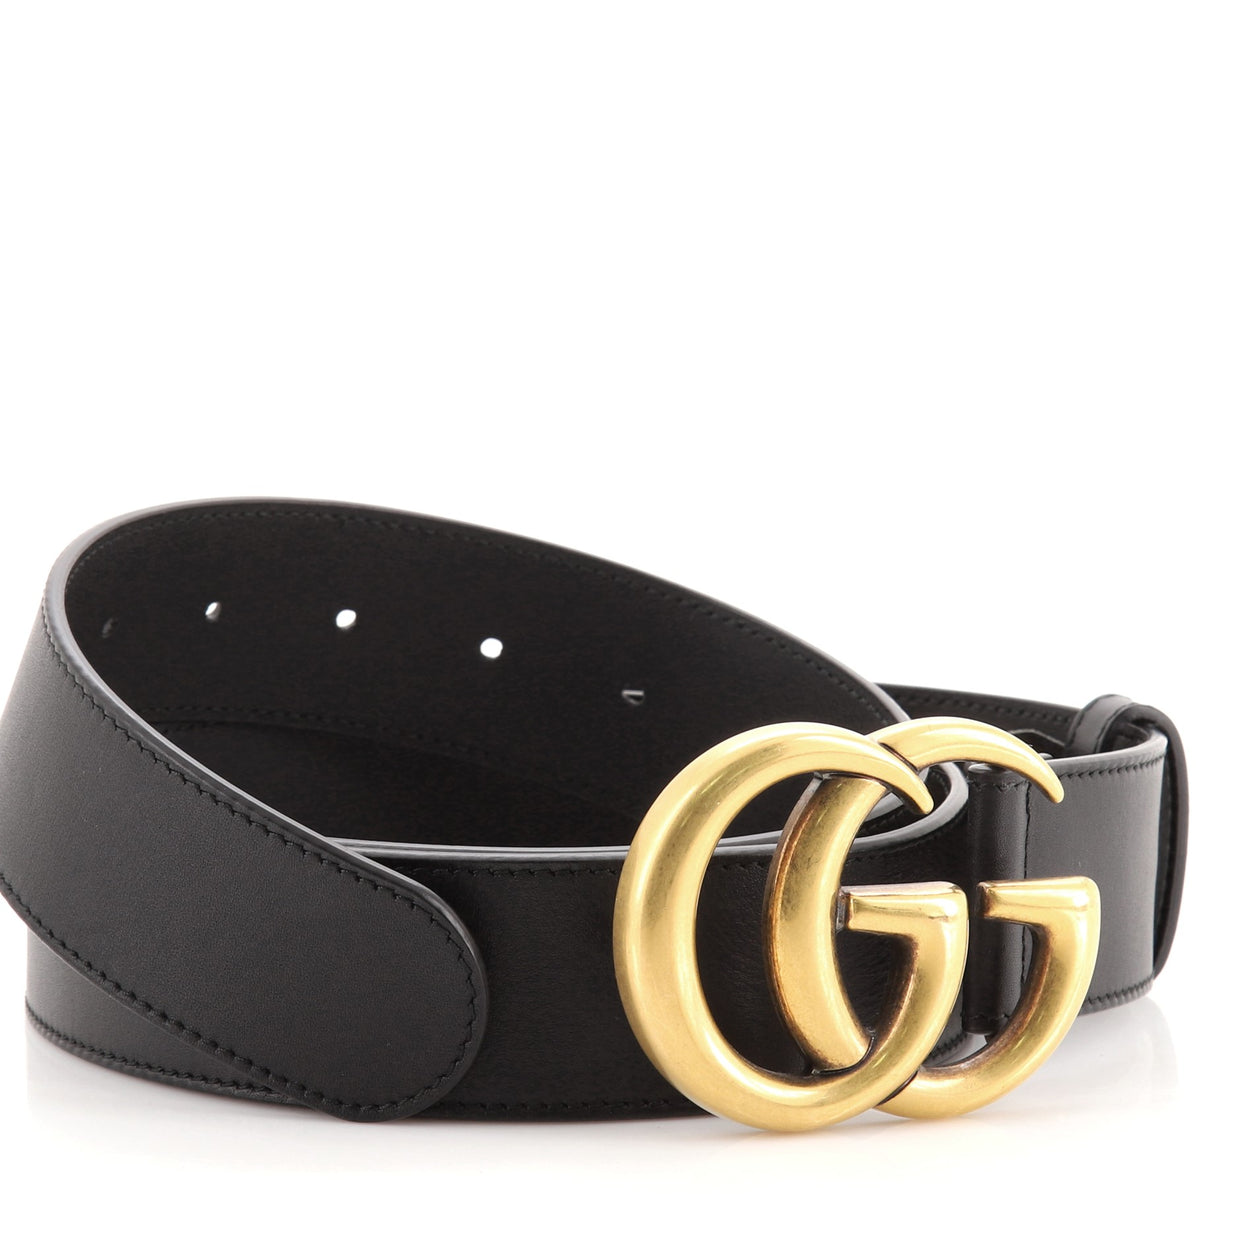 Gucci GG Marmont Belt Leather Wide 115 - Rebag